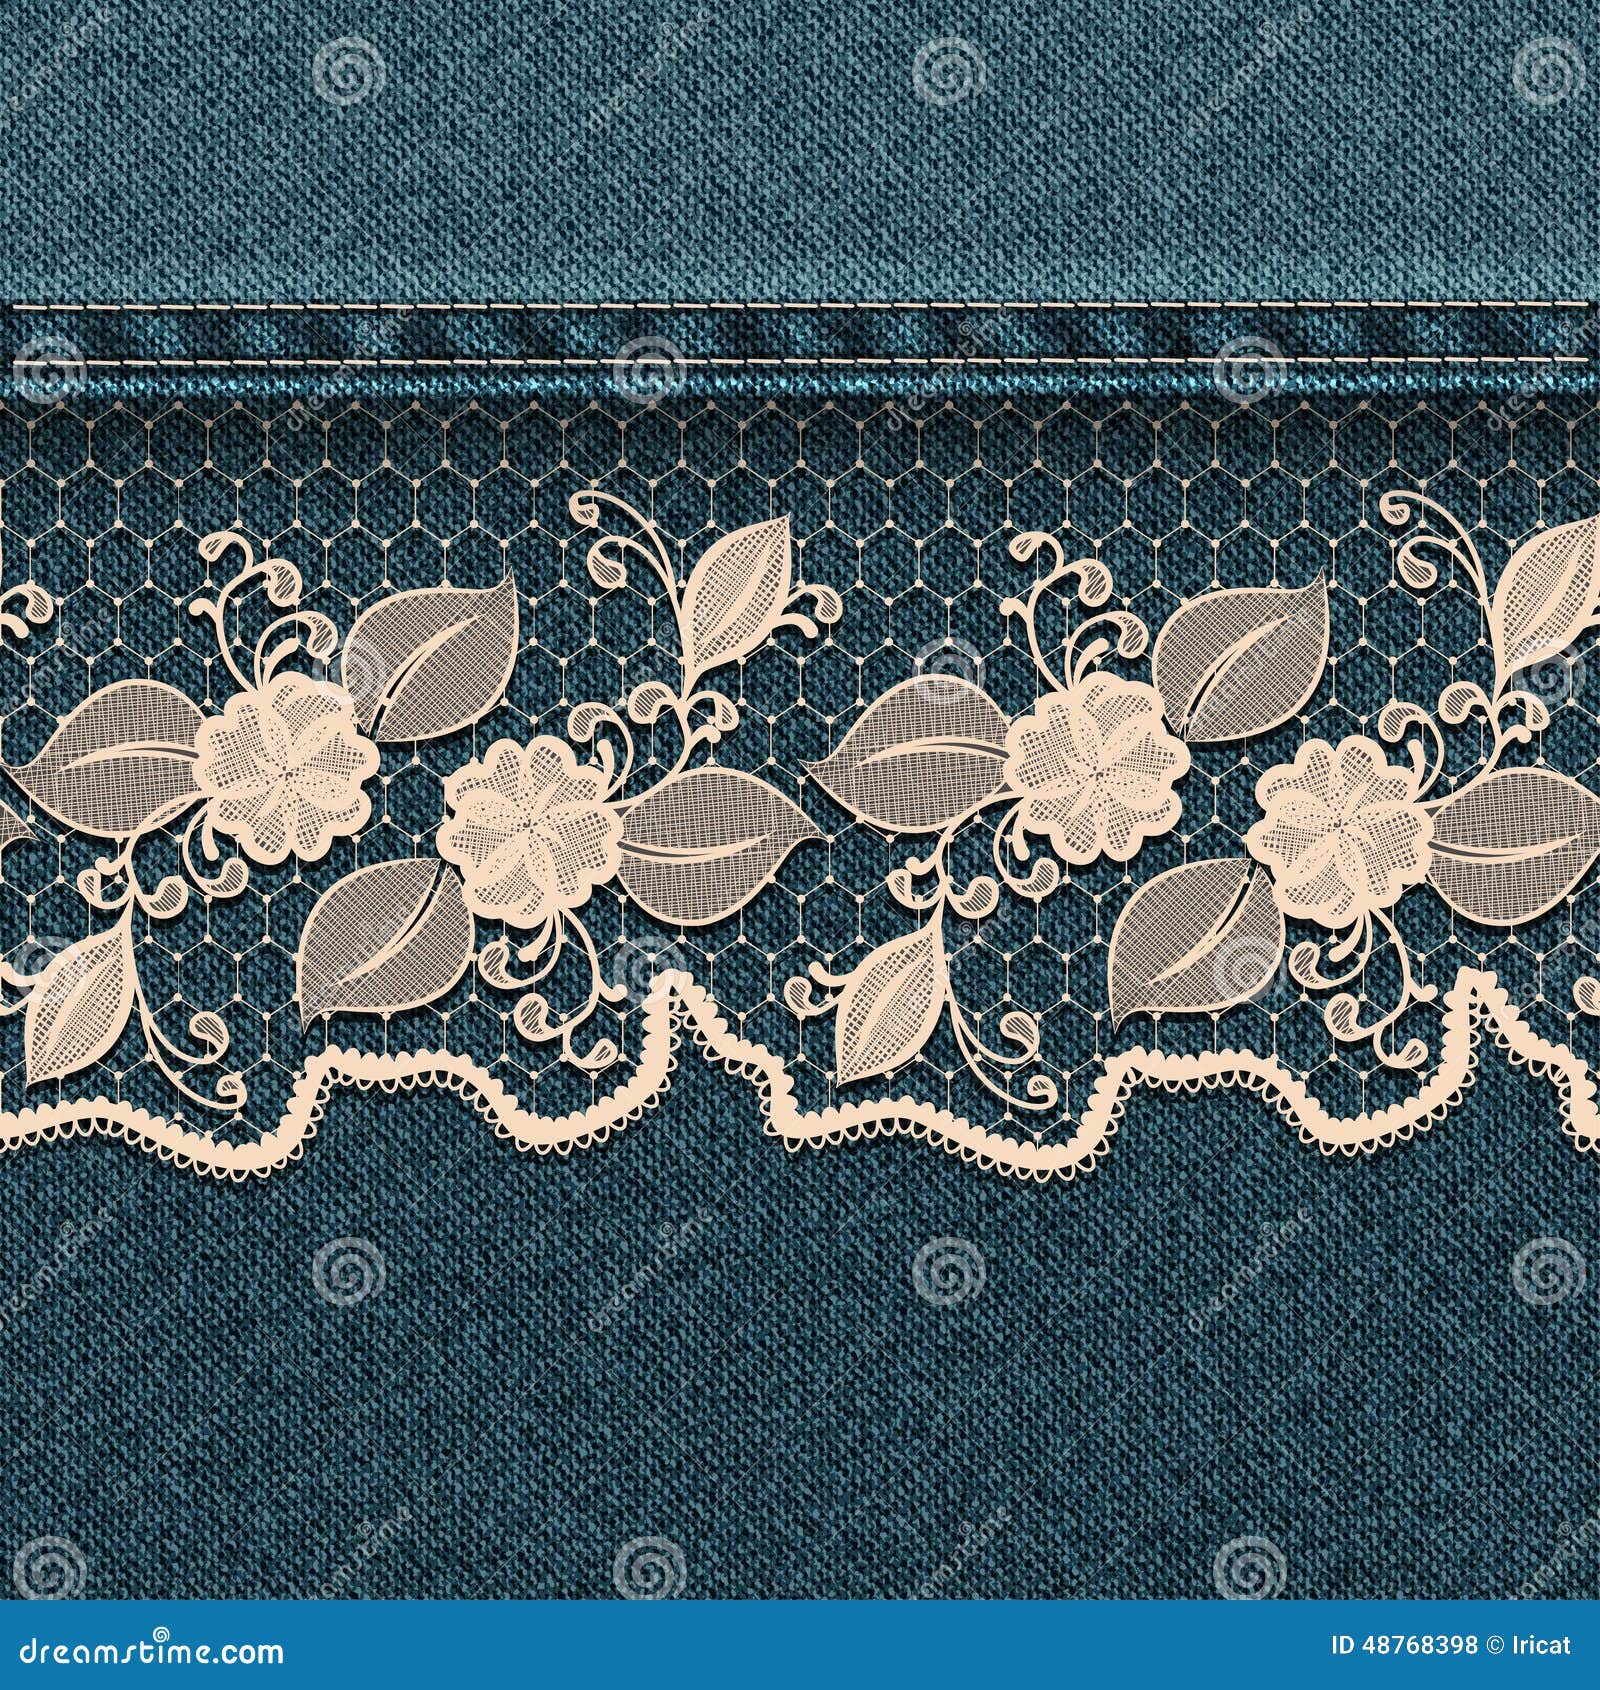 Silver lace flower embroidery on jeans or blue denim background design  Contemporary lace background ornamental floral background for wedding  invitation Decorative element for patches and stickers vector de Stock   Adobe Stock